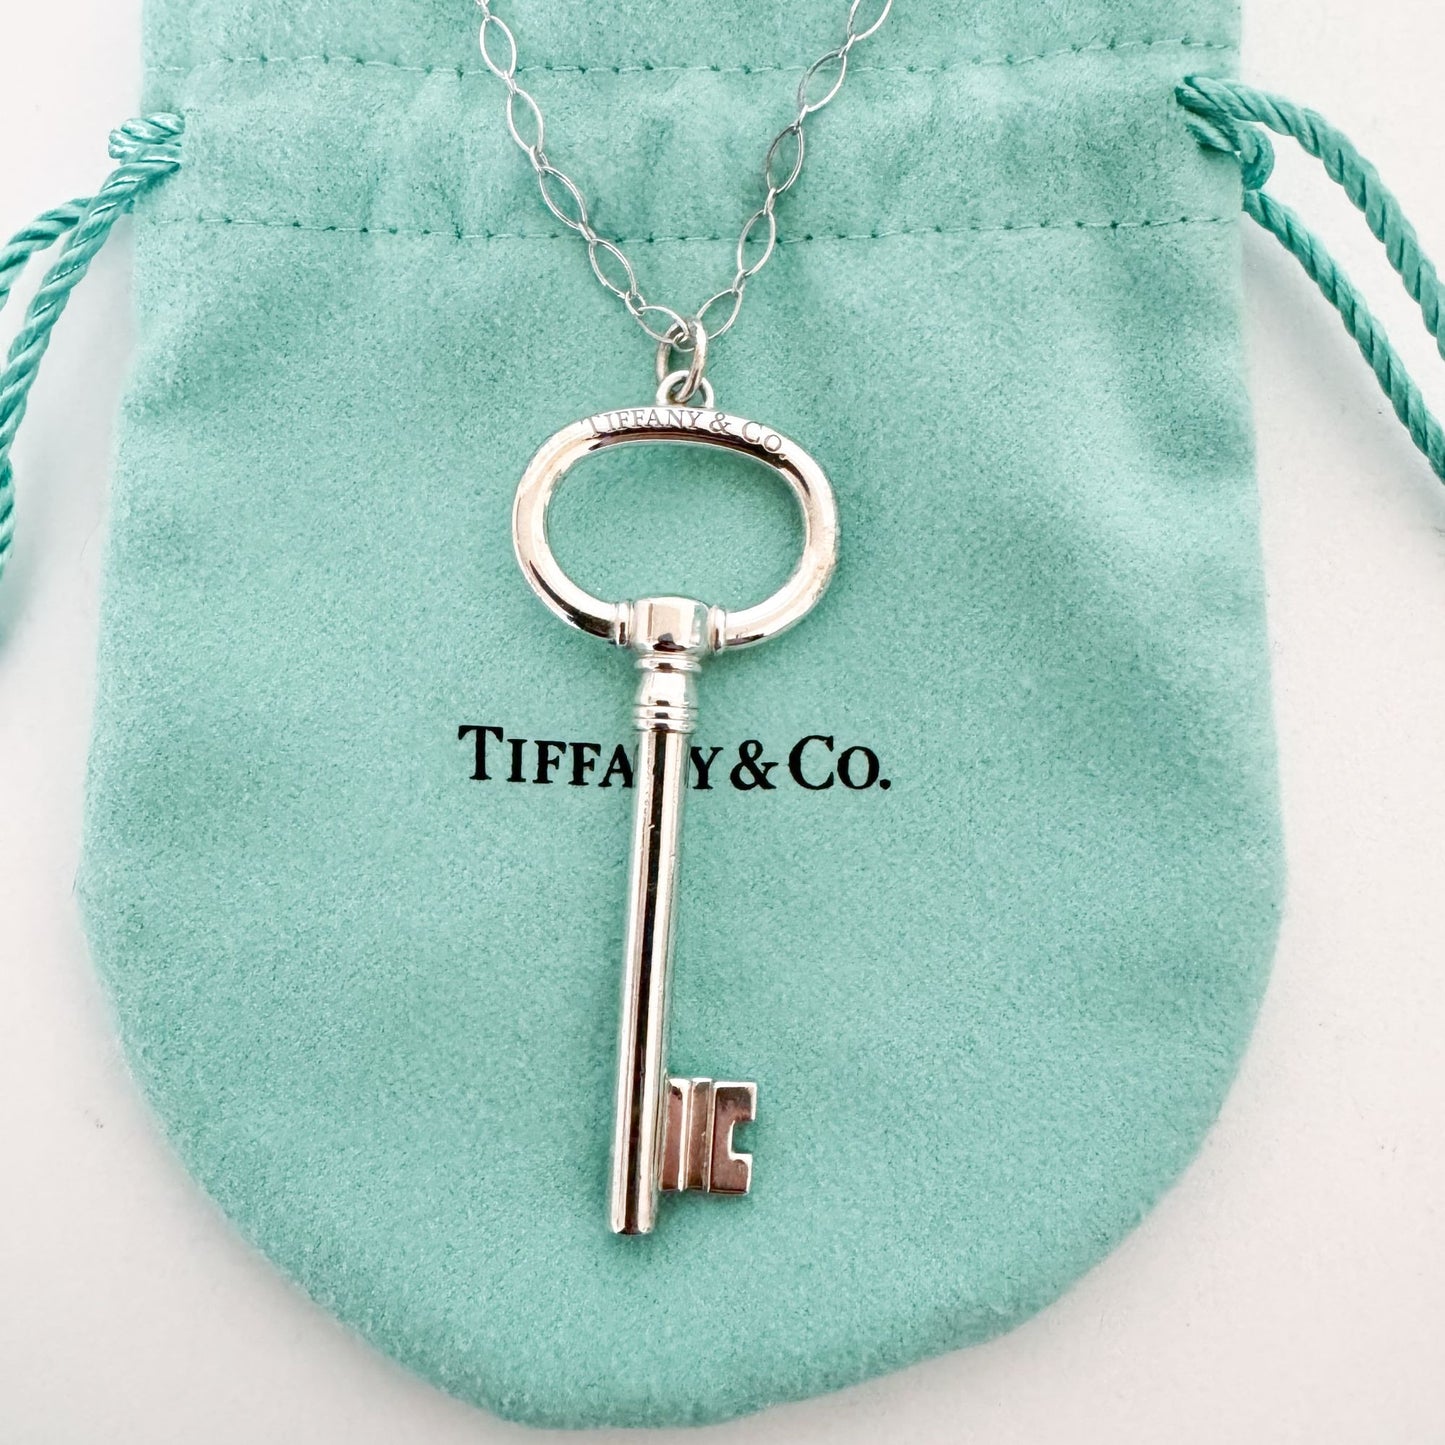 Tiffany & Co. Large Oval Key Pendant Necklace in Sterling Silver